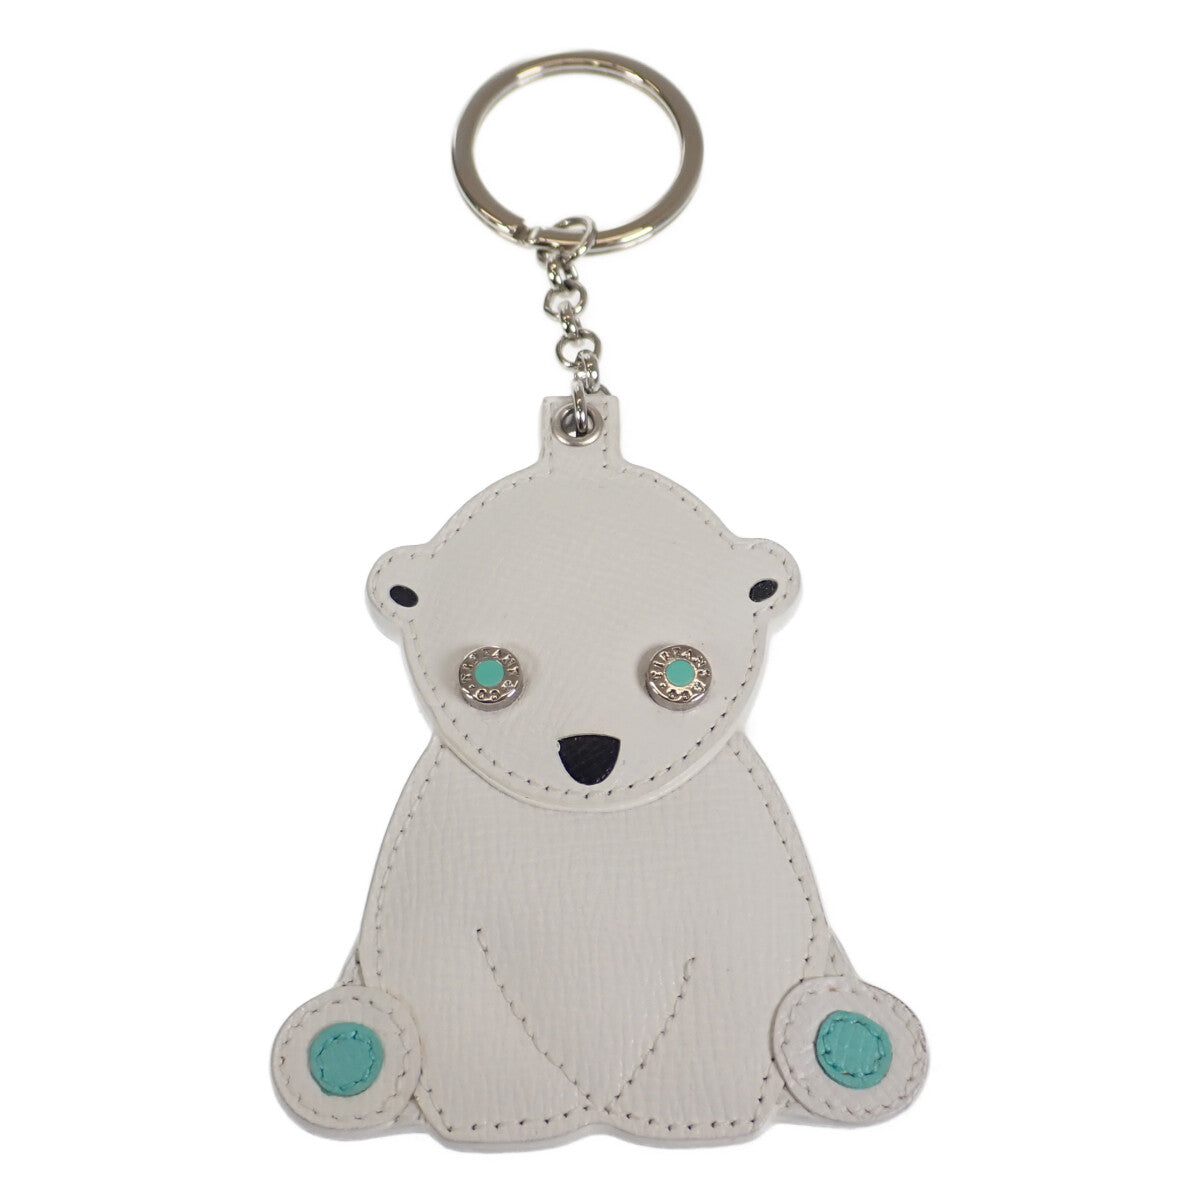 Tiffany & Co Leather Polar Bear Charm  Leather Key Chain in Good condition